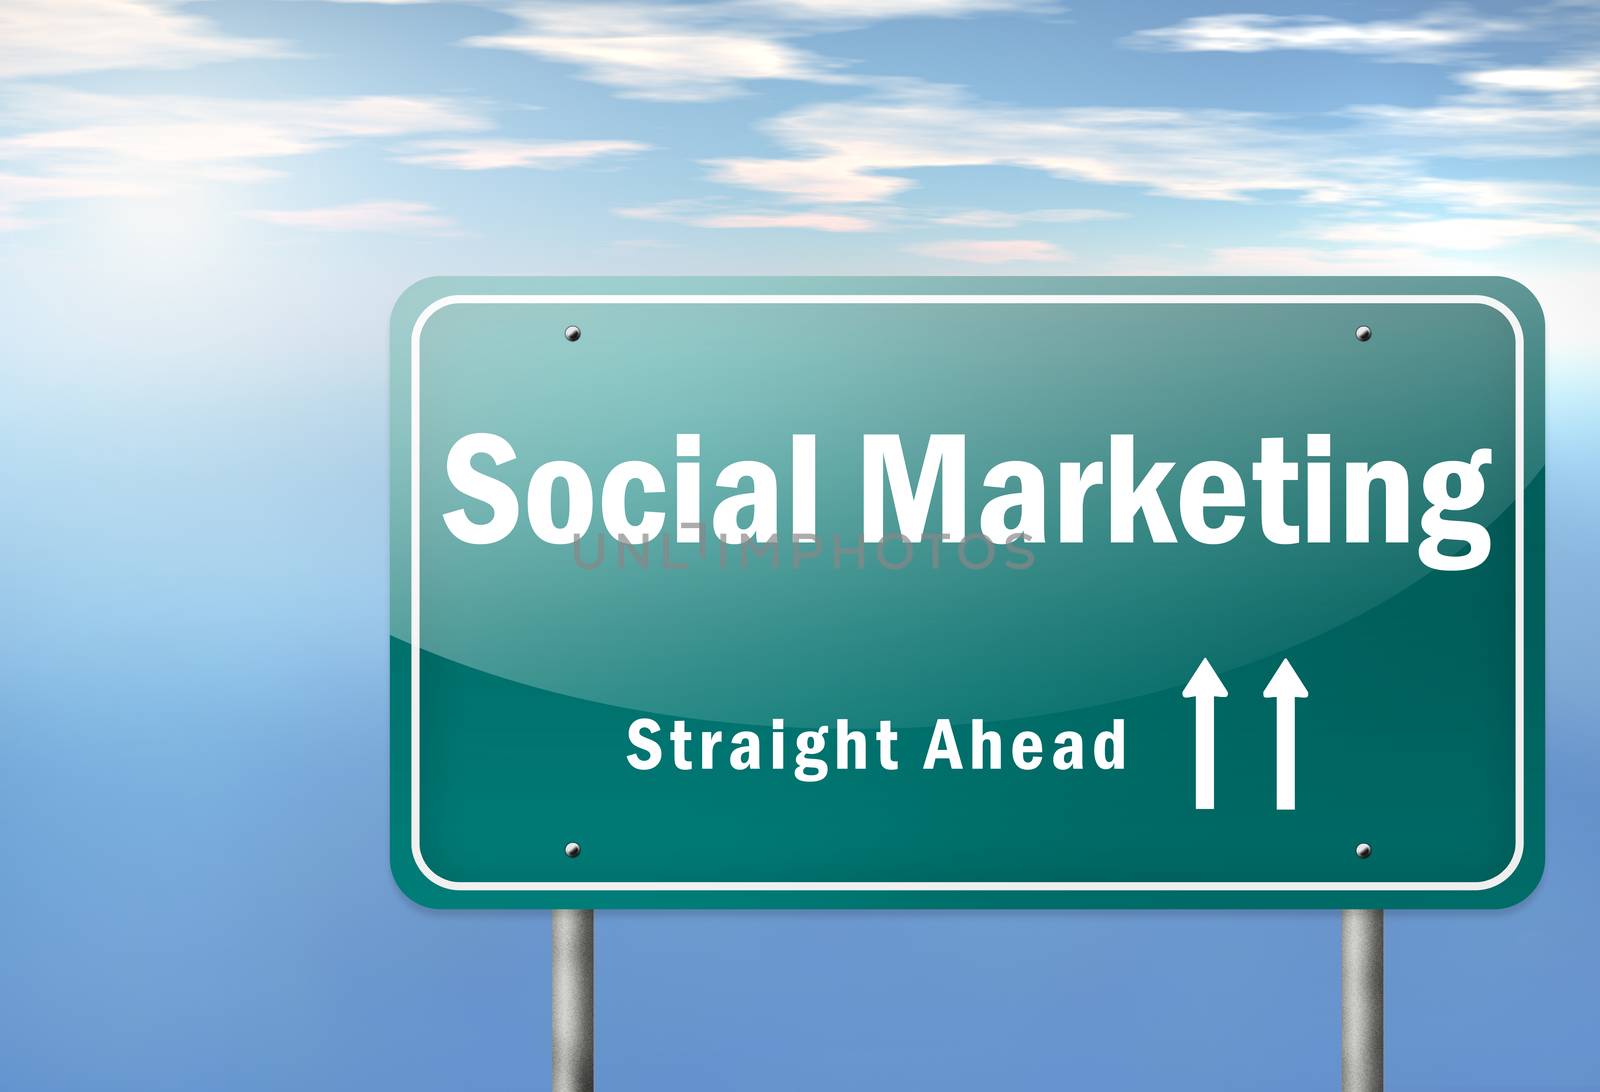 Highway Signpost with Social Marketing wording